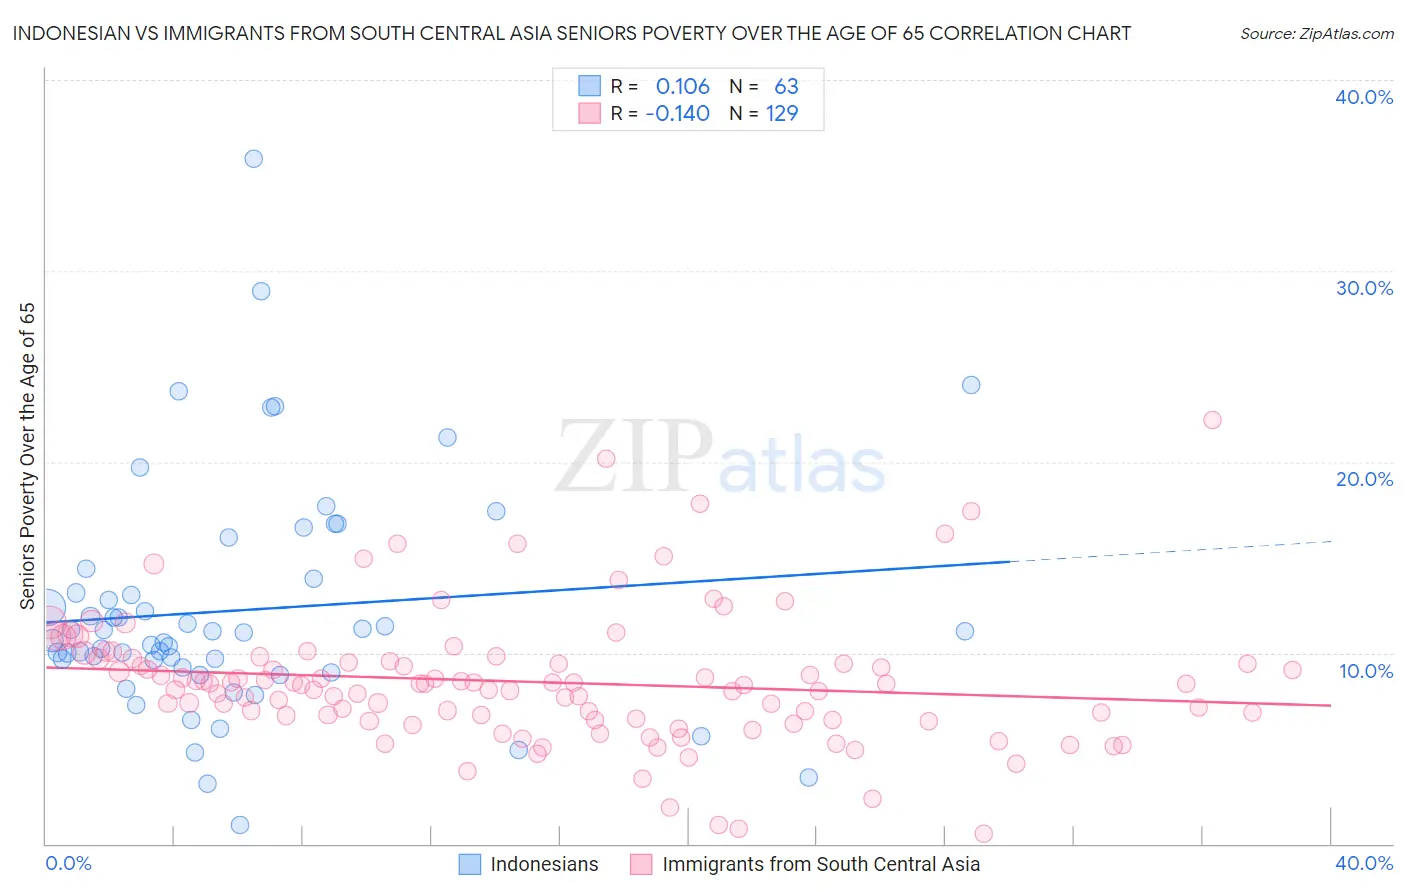 Indonesian vs Immigrants from South Central Asia Seniors Poverty Over the Age of 65